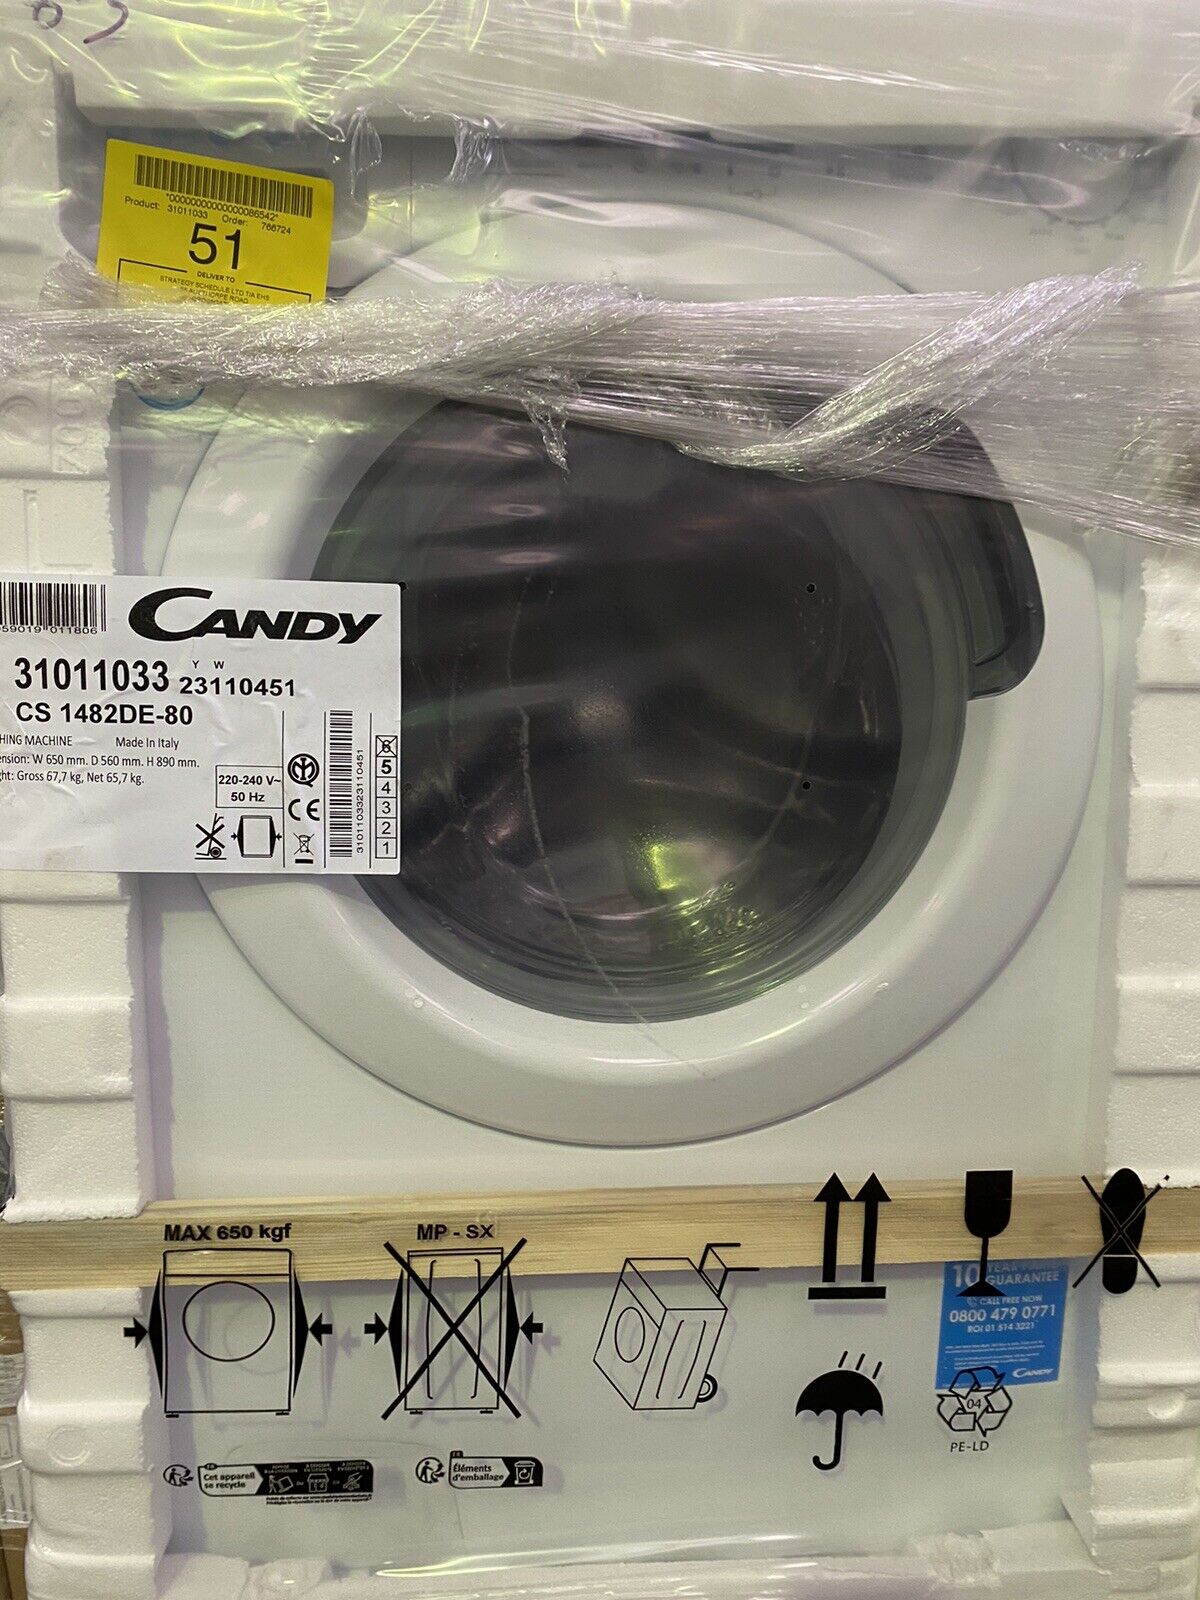 Candy 8kg Front-Load Washing Machine - White